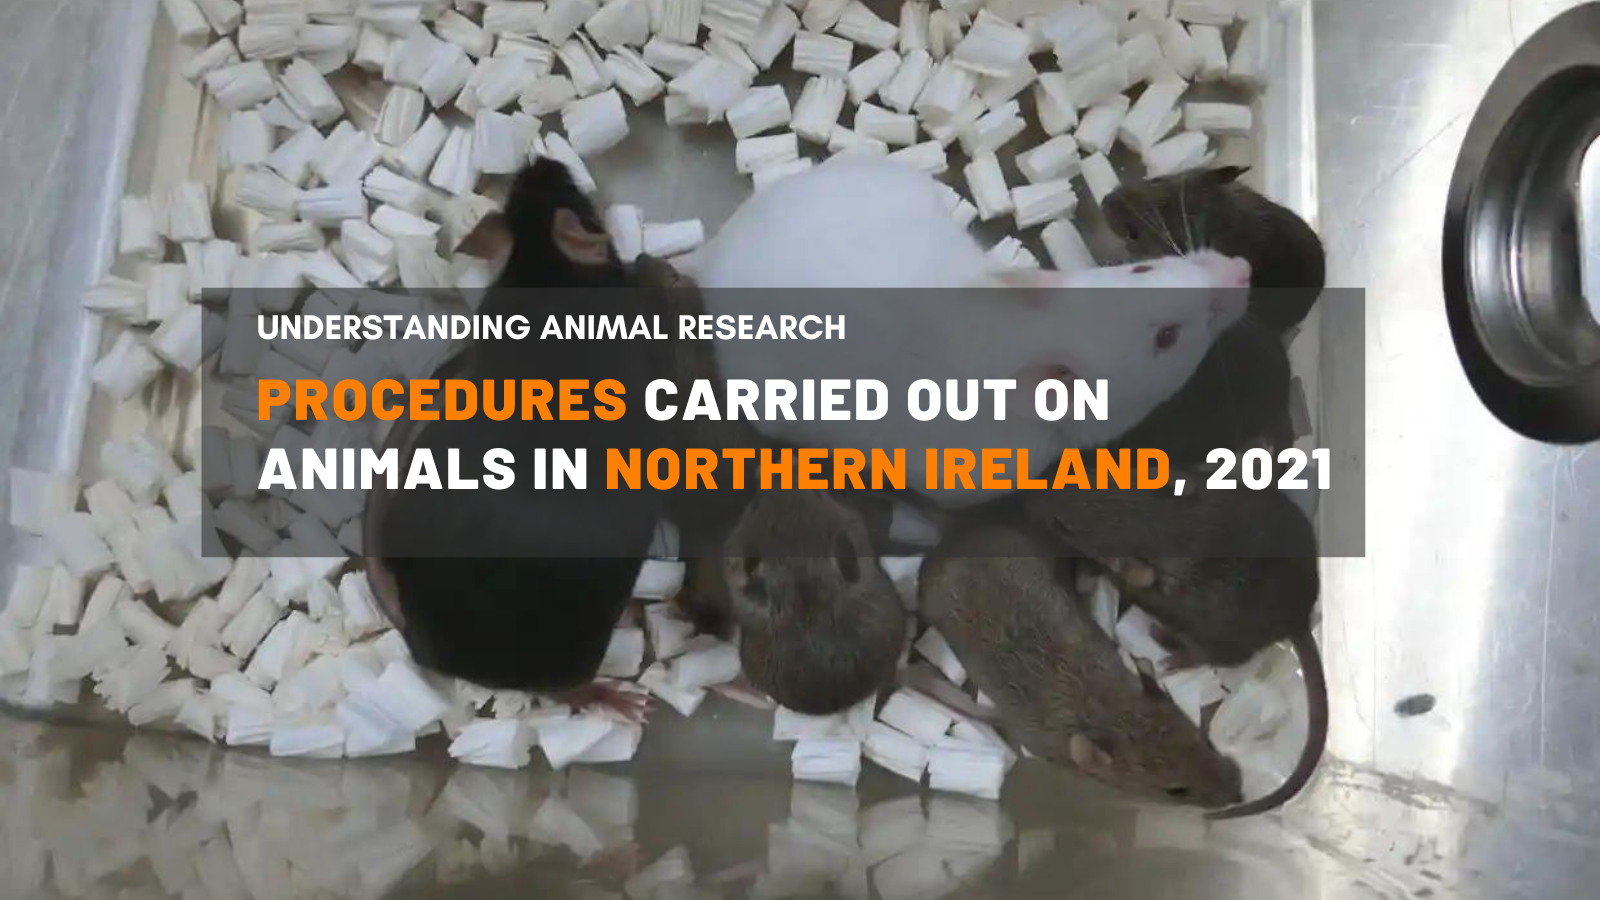 Procedures carried out on animals in Northern Ireland, 2021